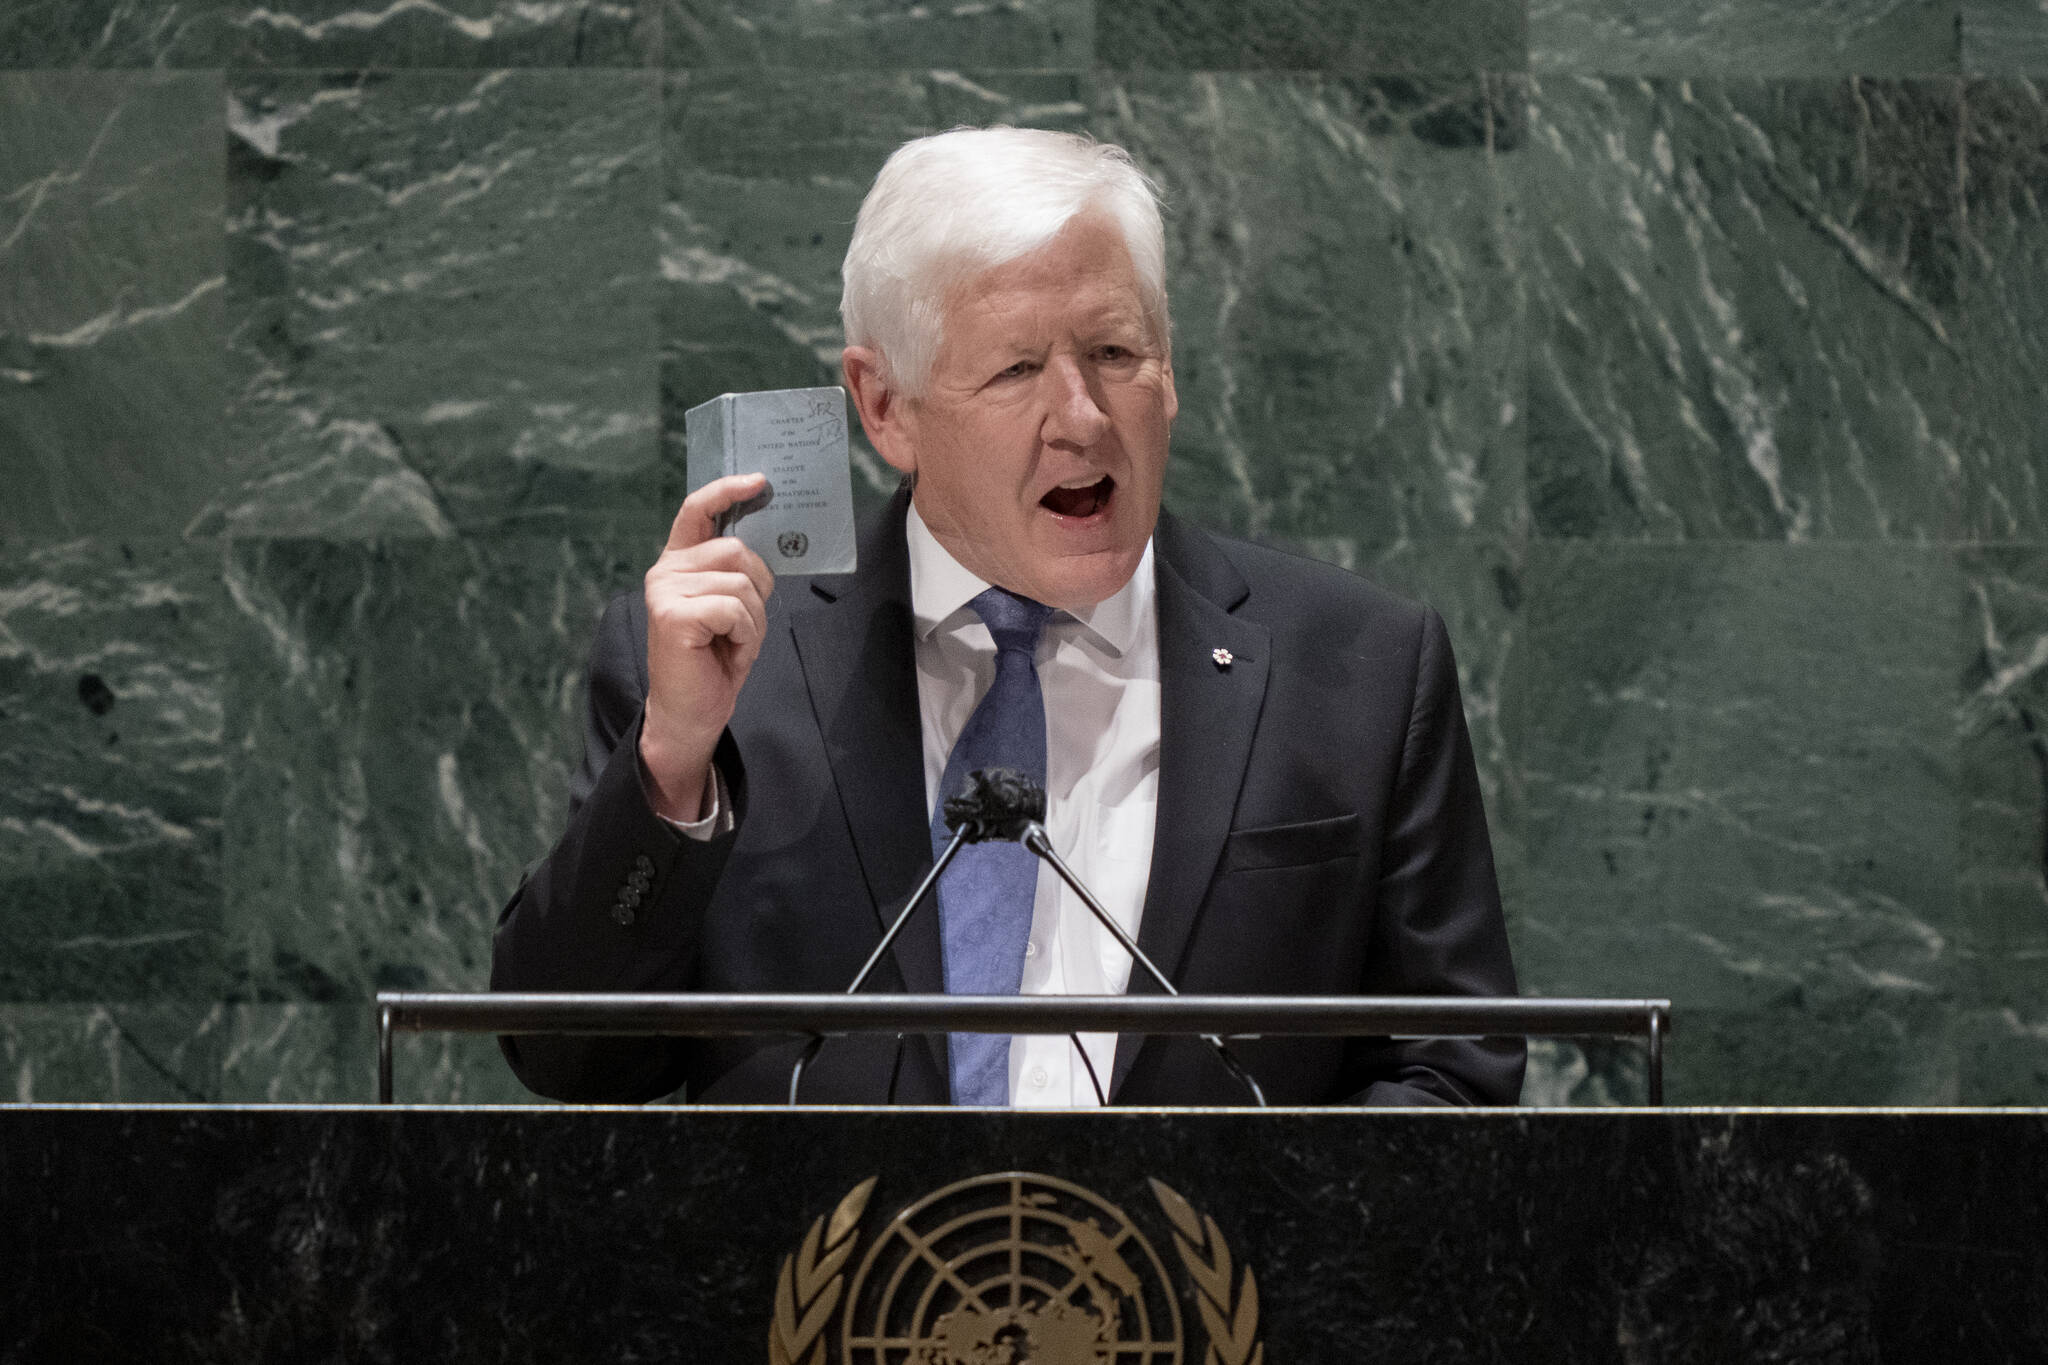 Bob Rae, ambassador of Canada to the United Nations, speaks while holding a copy of the United Nations charter at the general assembly hall, Wednesday, Feb. 23, 2022, at United Nations Headquarters. Russian President Vladimir Putin has received no support from members of the U.N. Security Council for his actions to bring separatists in eastern Ukraine under Moscow’s control. At an emergency meeting Monday night, the U.S. called Putin’s moves a pretext for a further invasion. (AP Photo/John Minchillo)